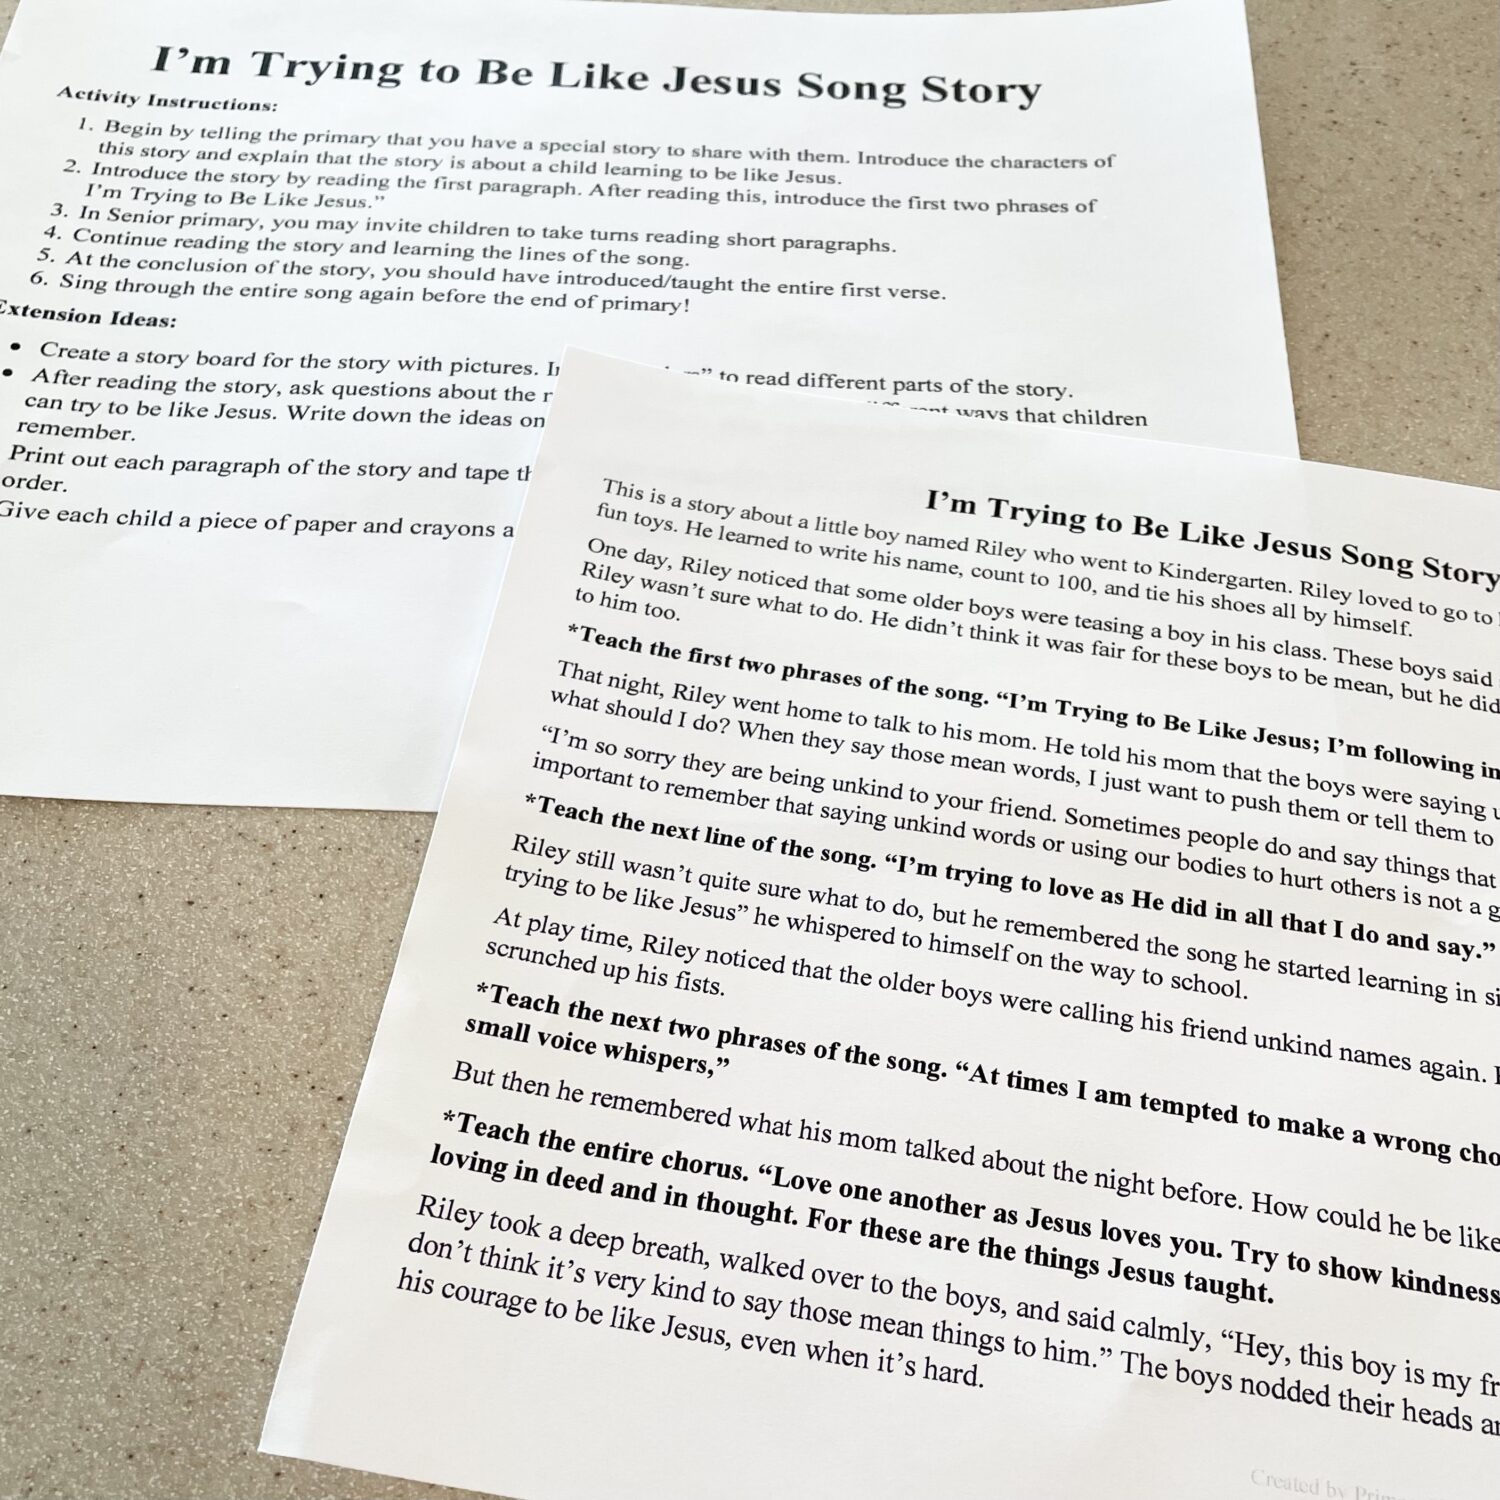 I'm Trying to Be Like Jesus Song Story Easy ideas for Music Leaders IMG 6643